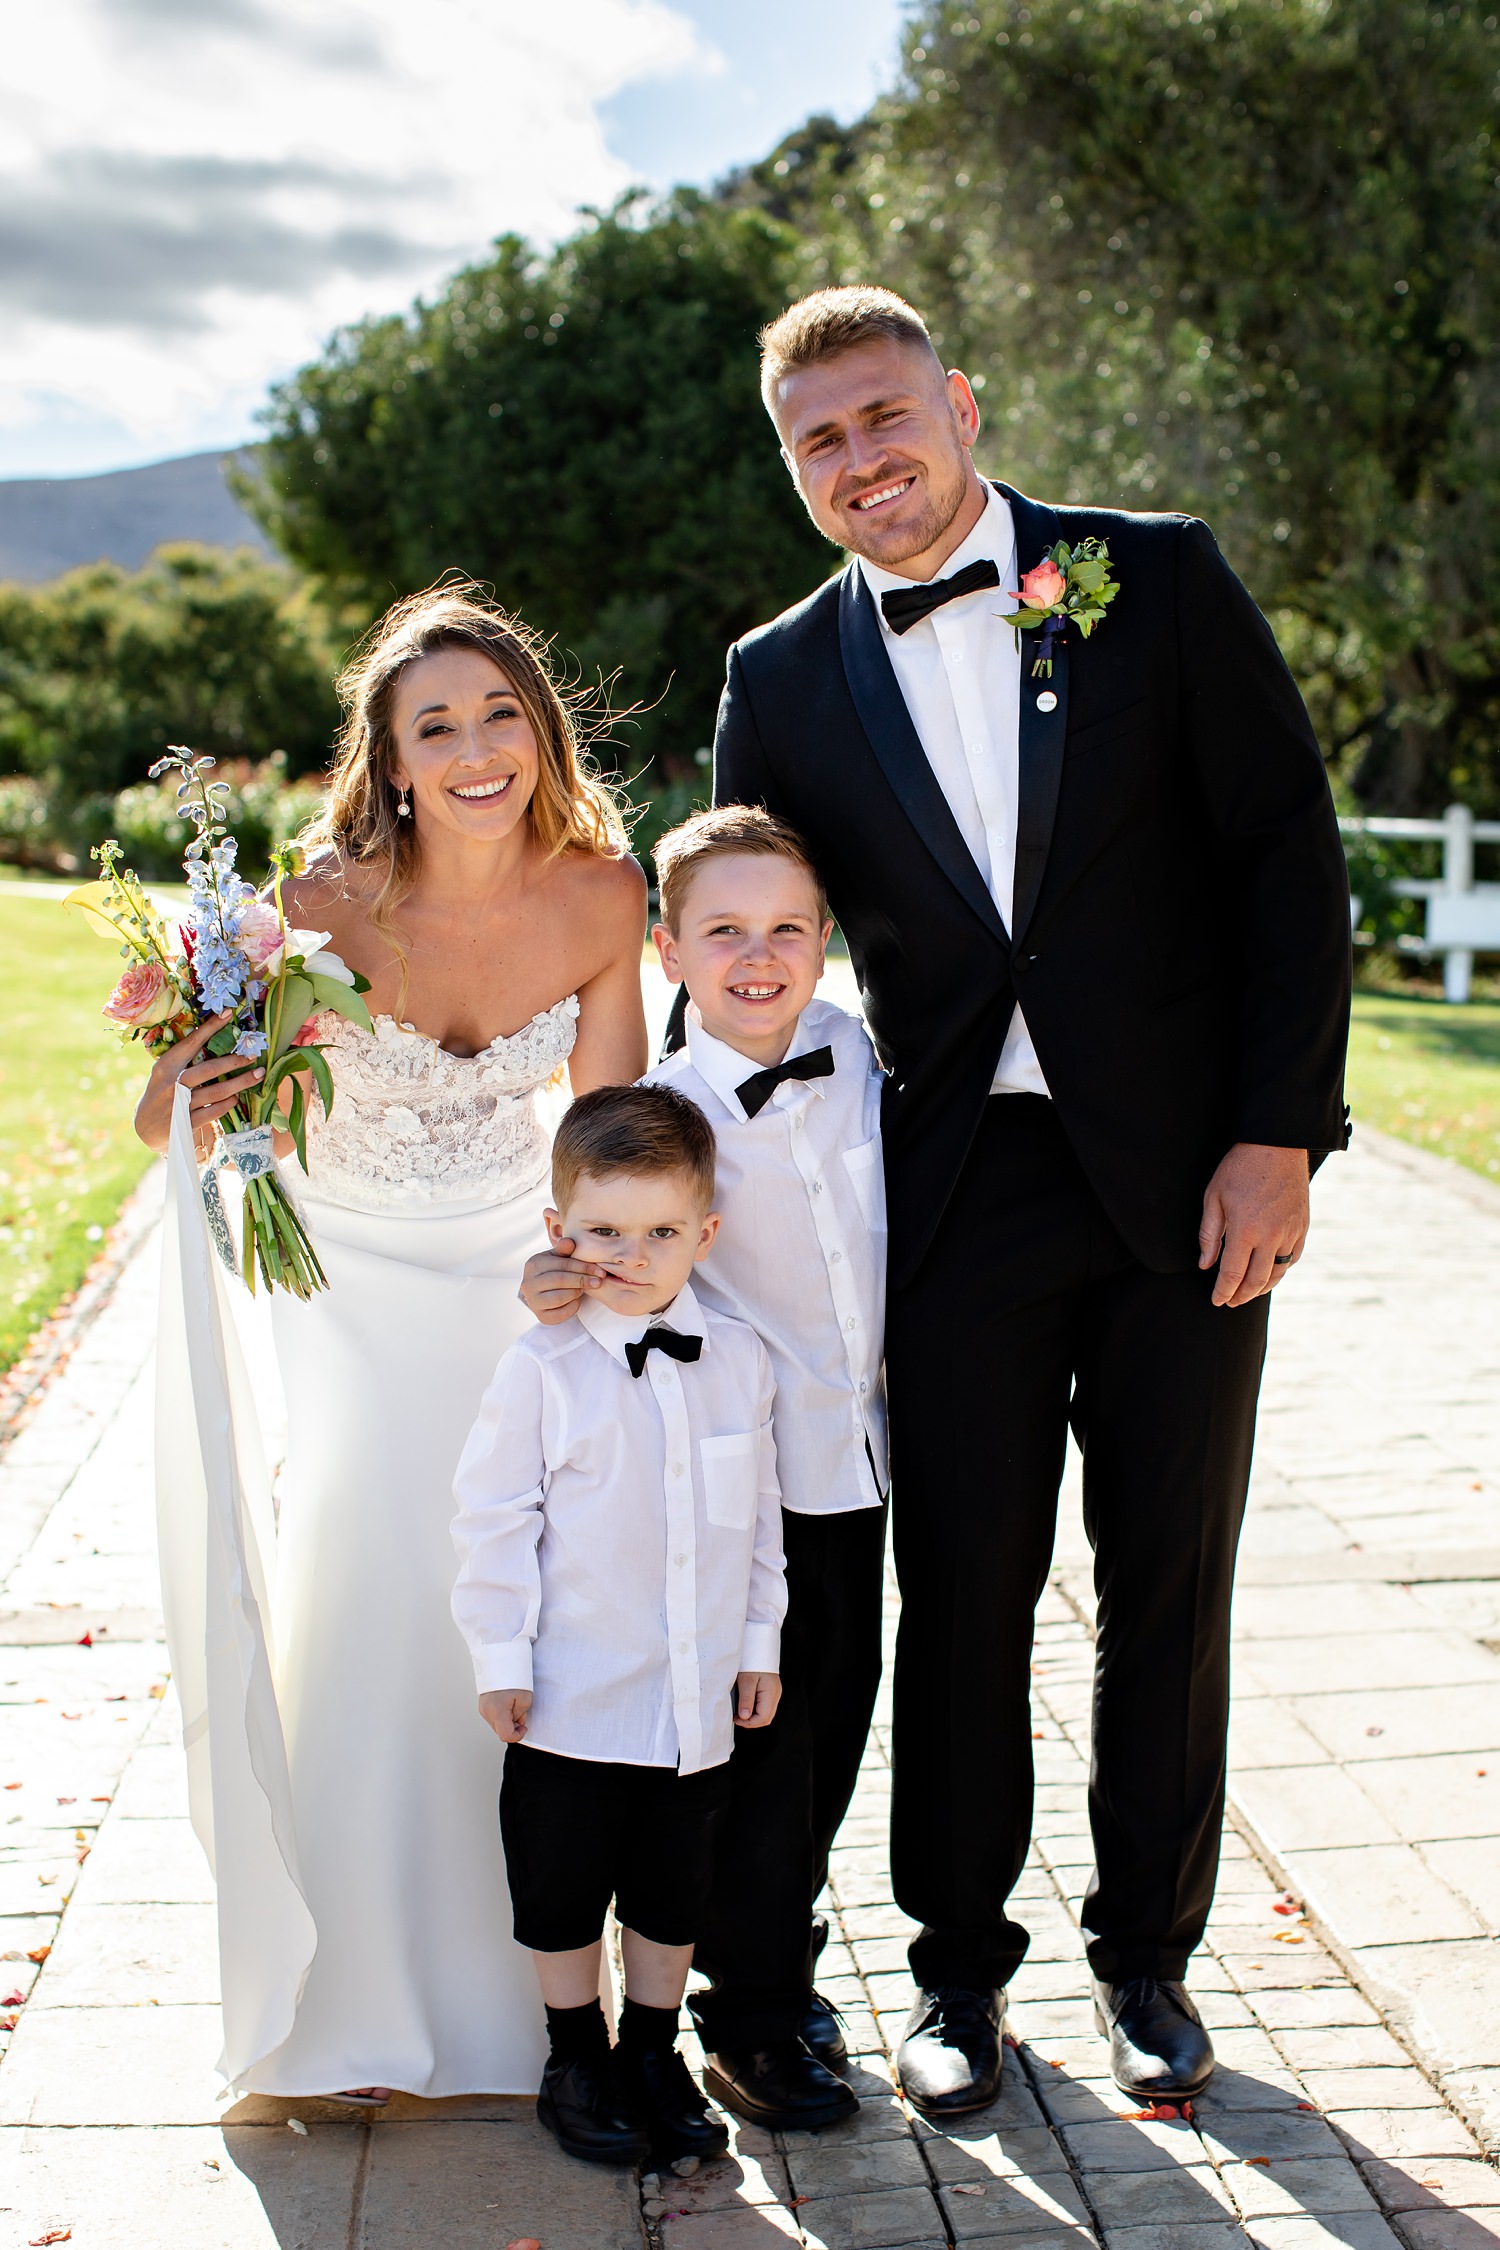 The bride and groom pose for a funny photograph with ring bearers at Blomfontein wedding venue near Cradock by wedding photographer in South Africa, Niki M Photography